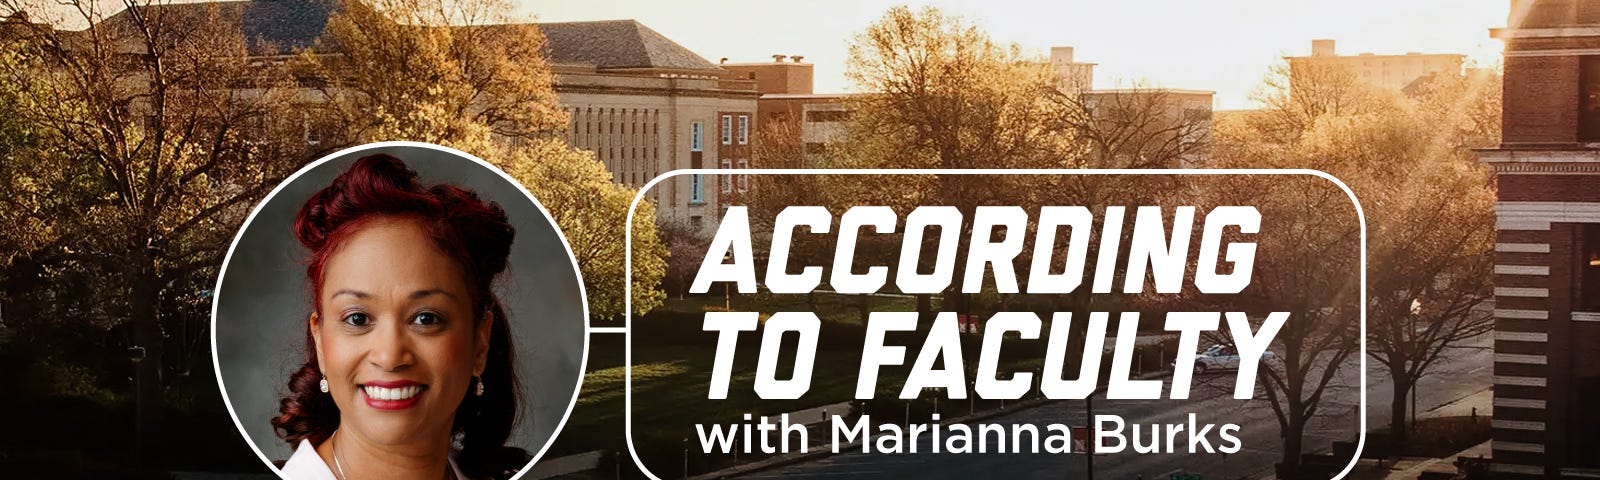 A photo of Marianna set over a photo of campus with text that reads “According to Faculty with Marianna Burks”